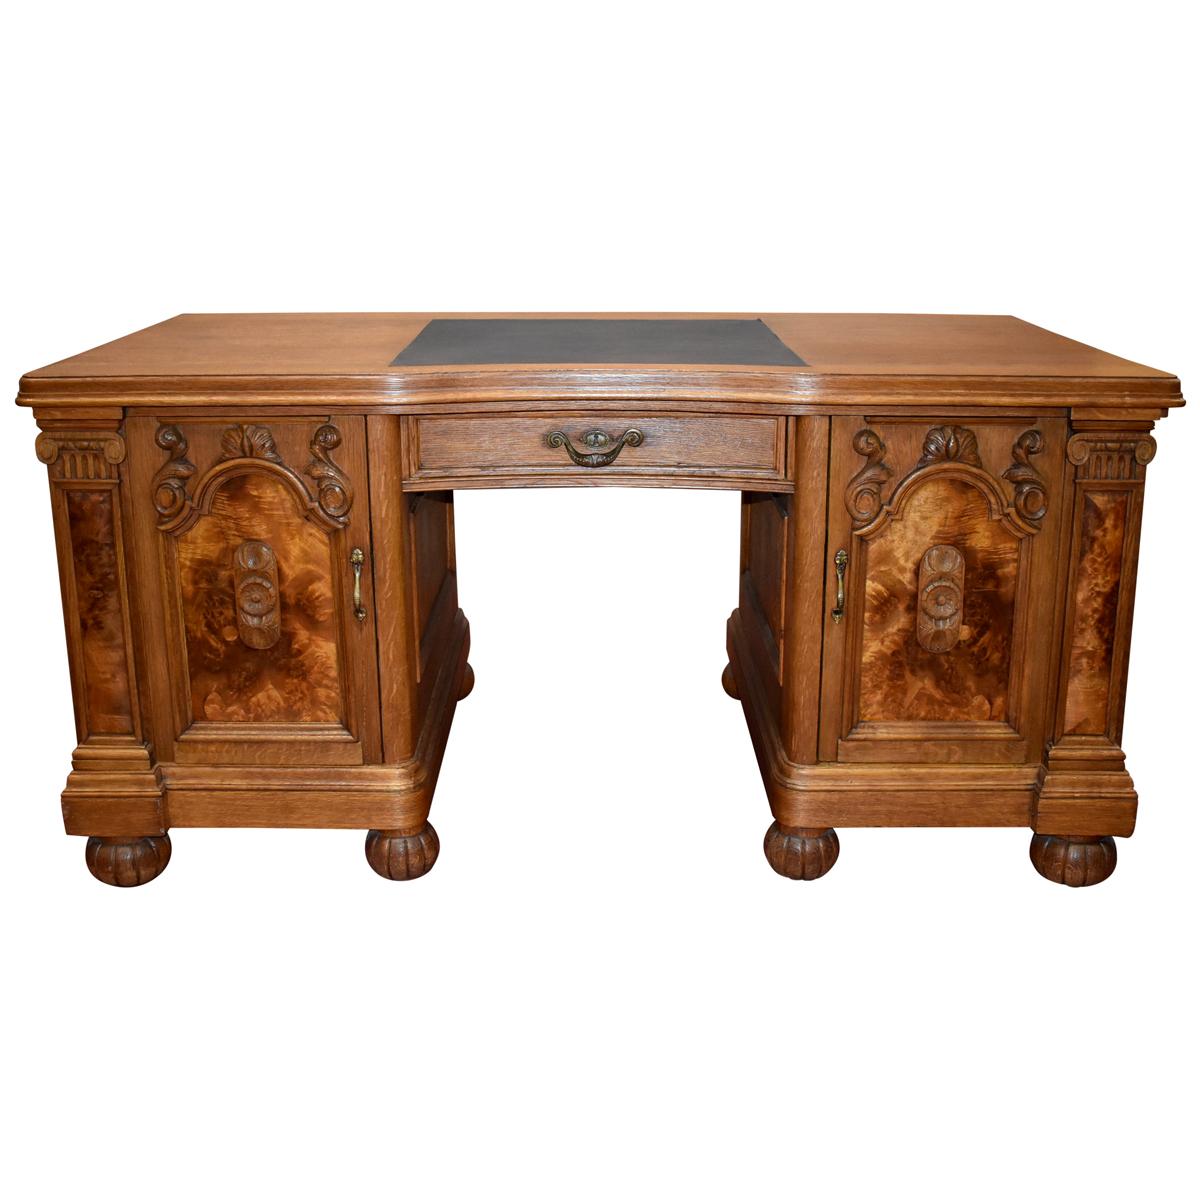 German Oak Desk with Burled Walnut Accents, circa 1930 For Sale